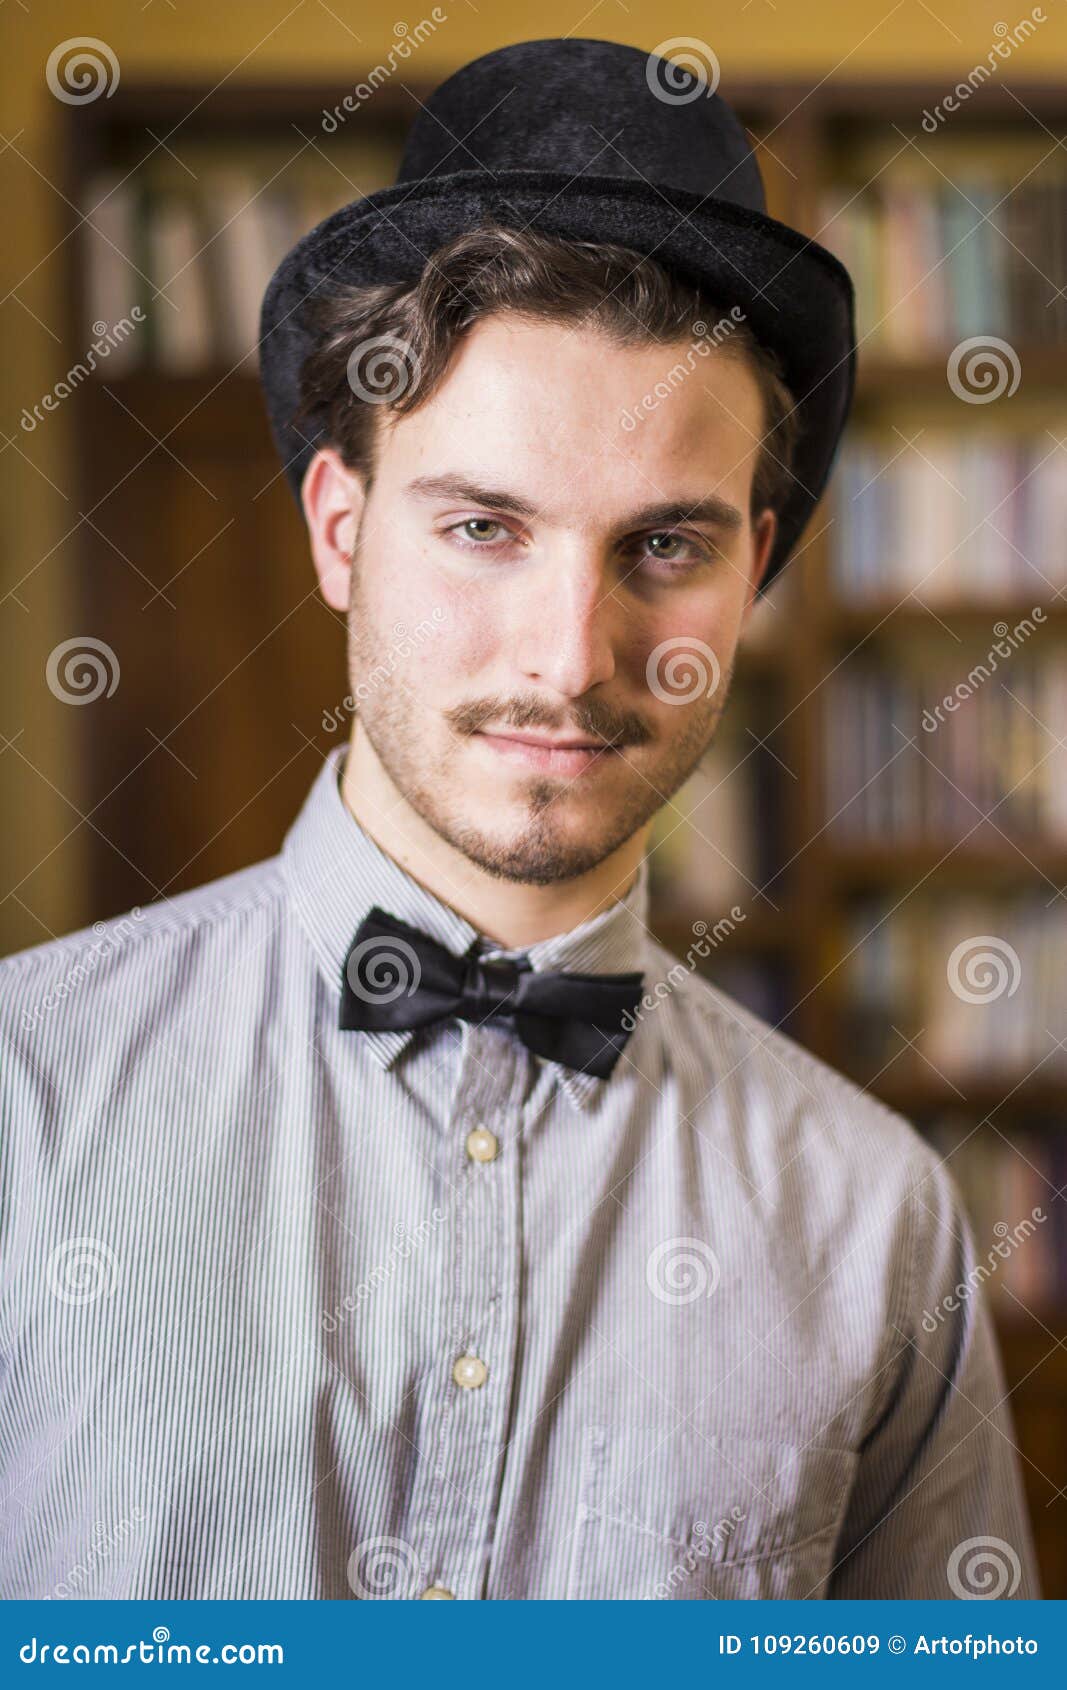 Attractive Young Man Wearing Top Hat and Bow Tie Stock Image - Image of ...